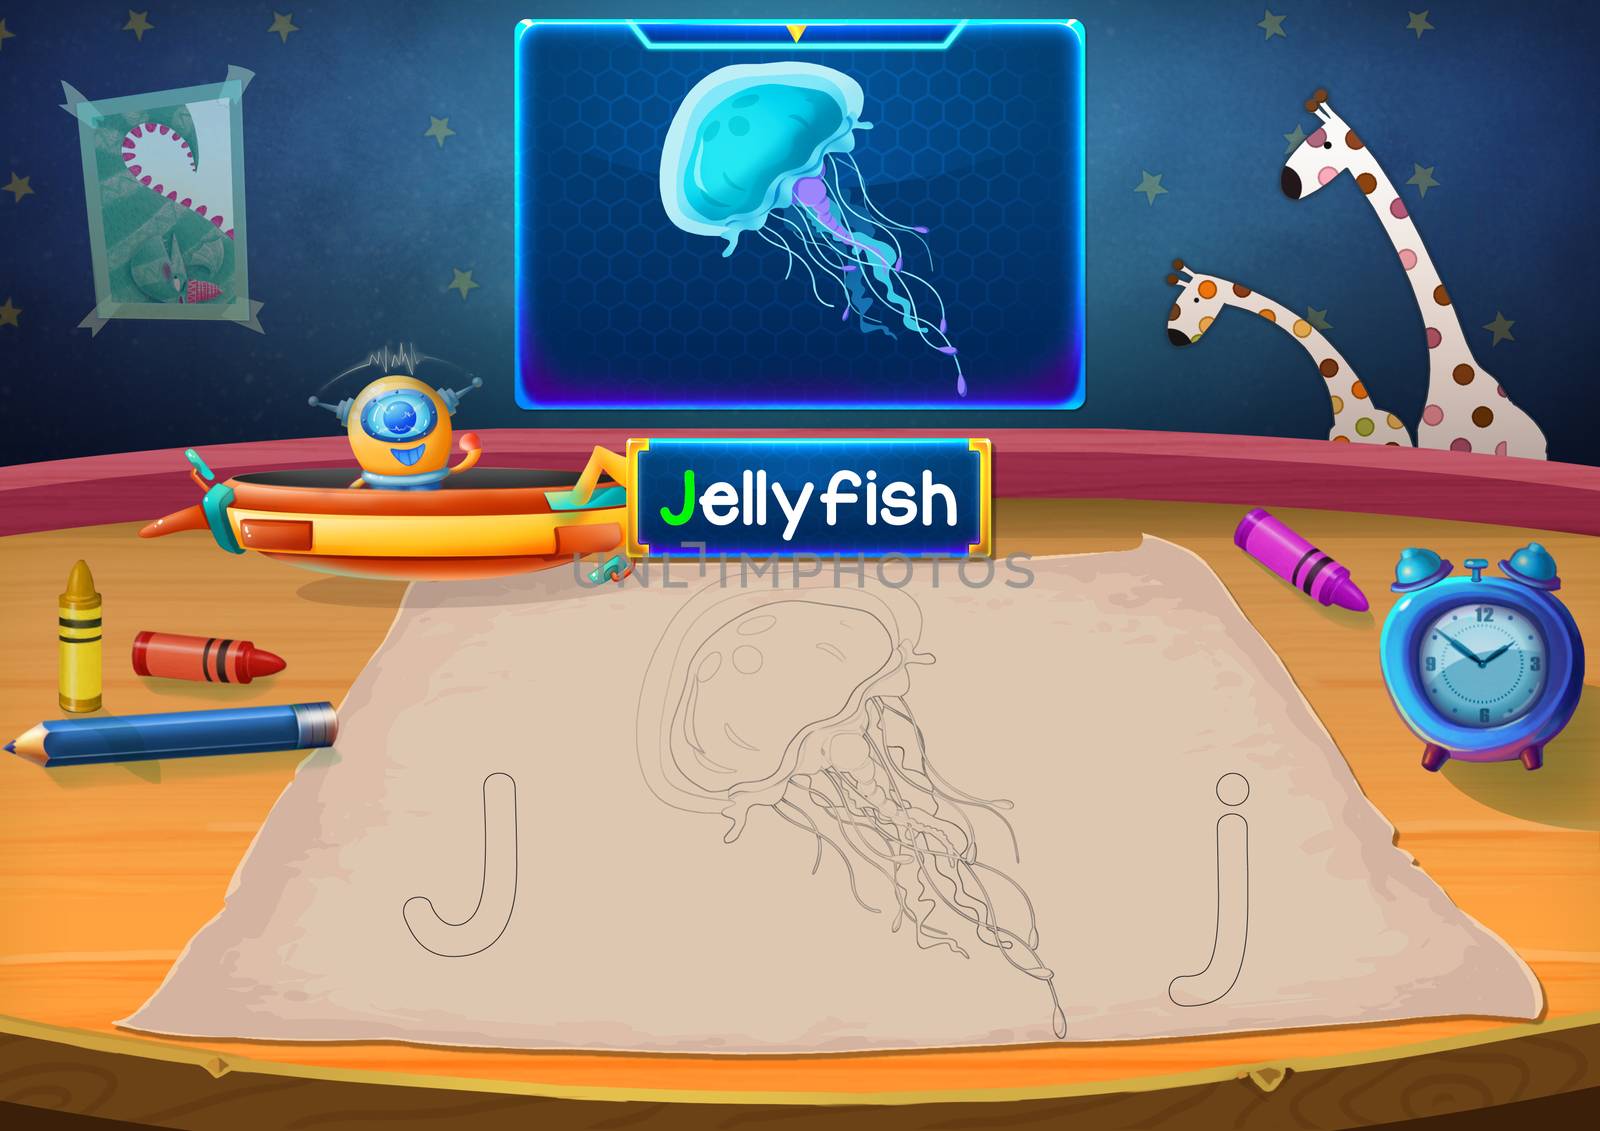 Illustration: Martian Class: J - Jellyfish. The Martian in the picture opens a class for all Aliens. You must follow and use crayons coloring the outlines below. Fantastic Sci-Fi Cartoon Scene Design